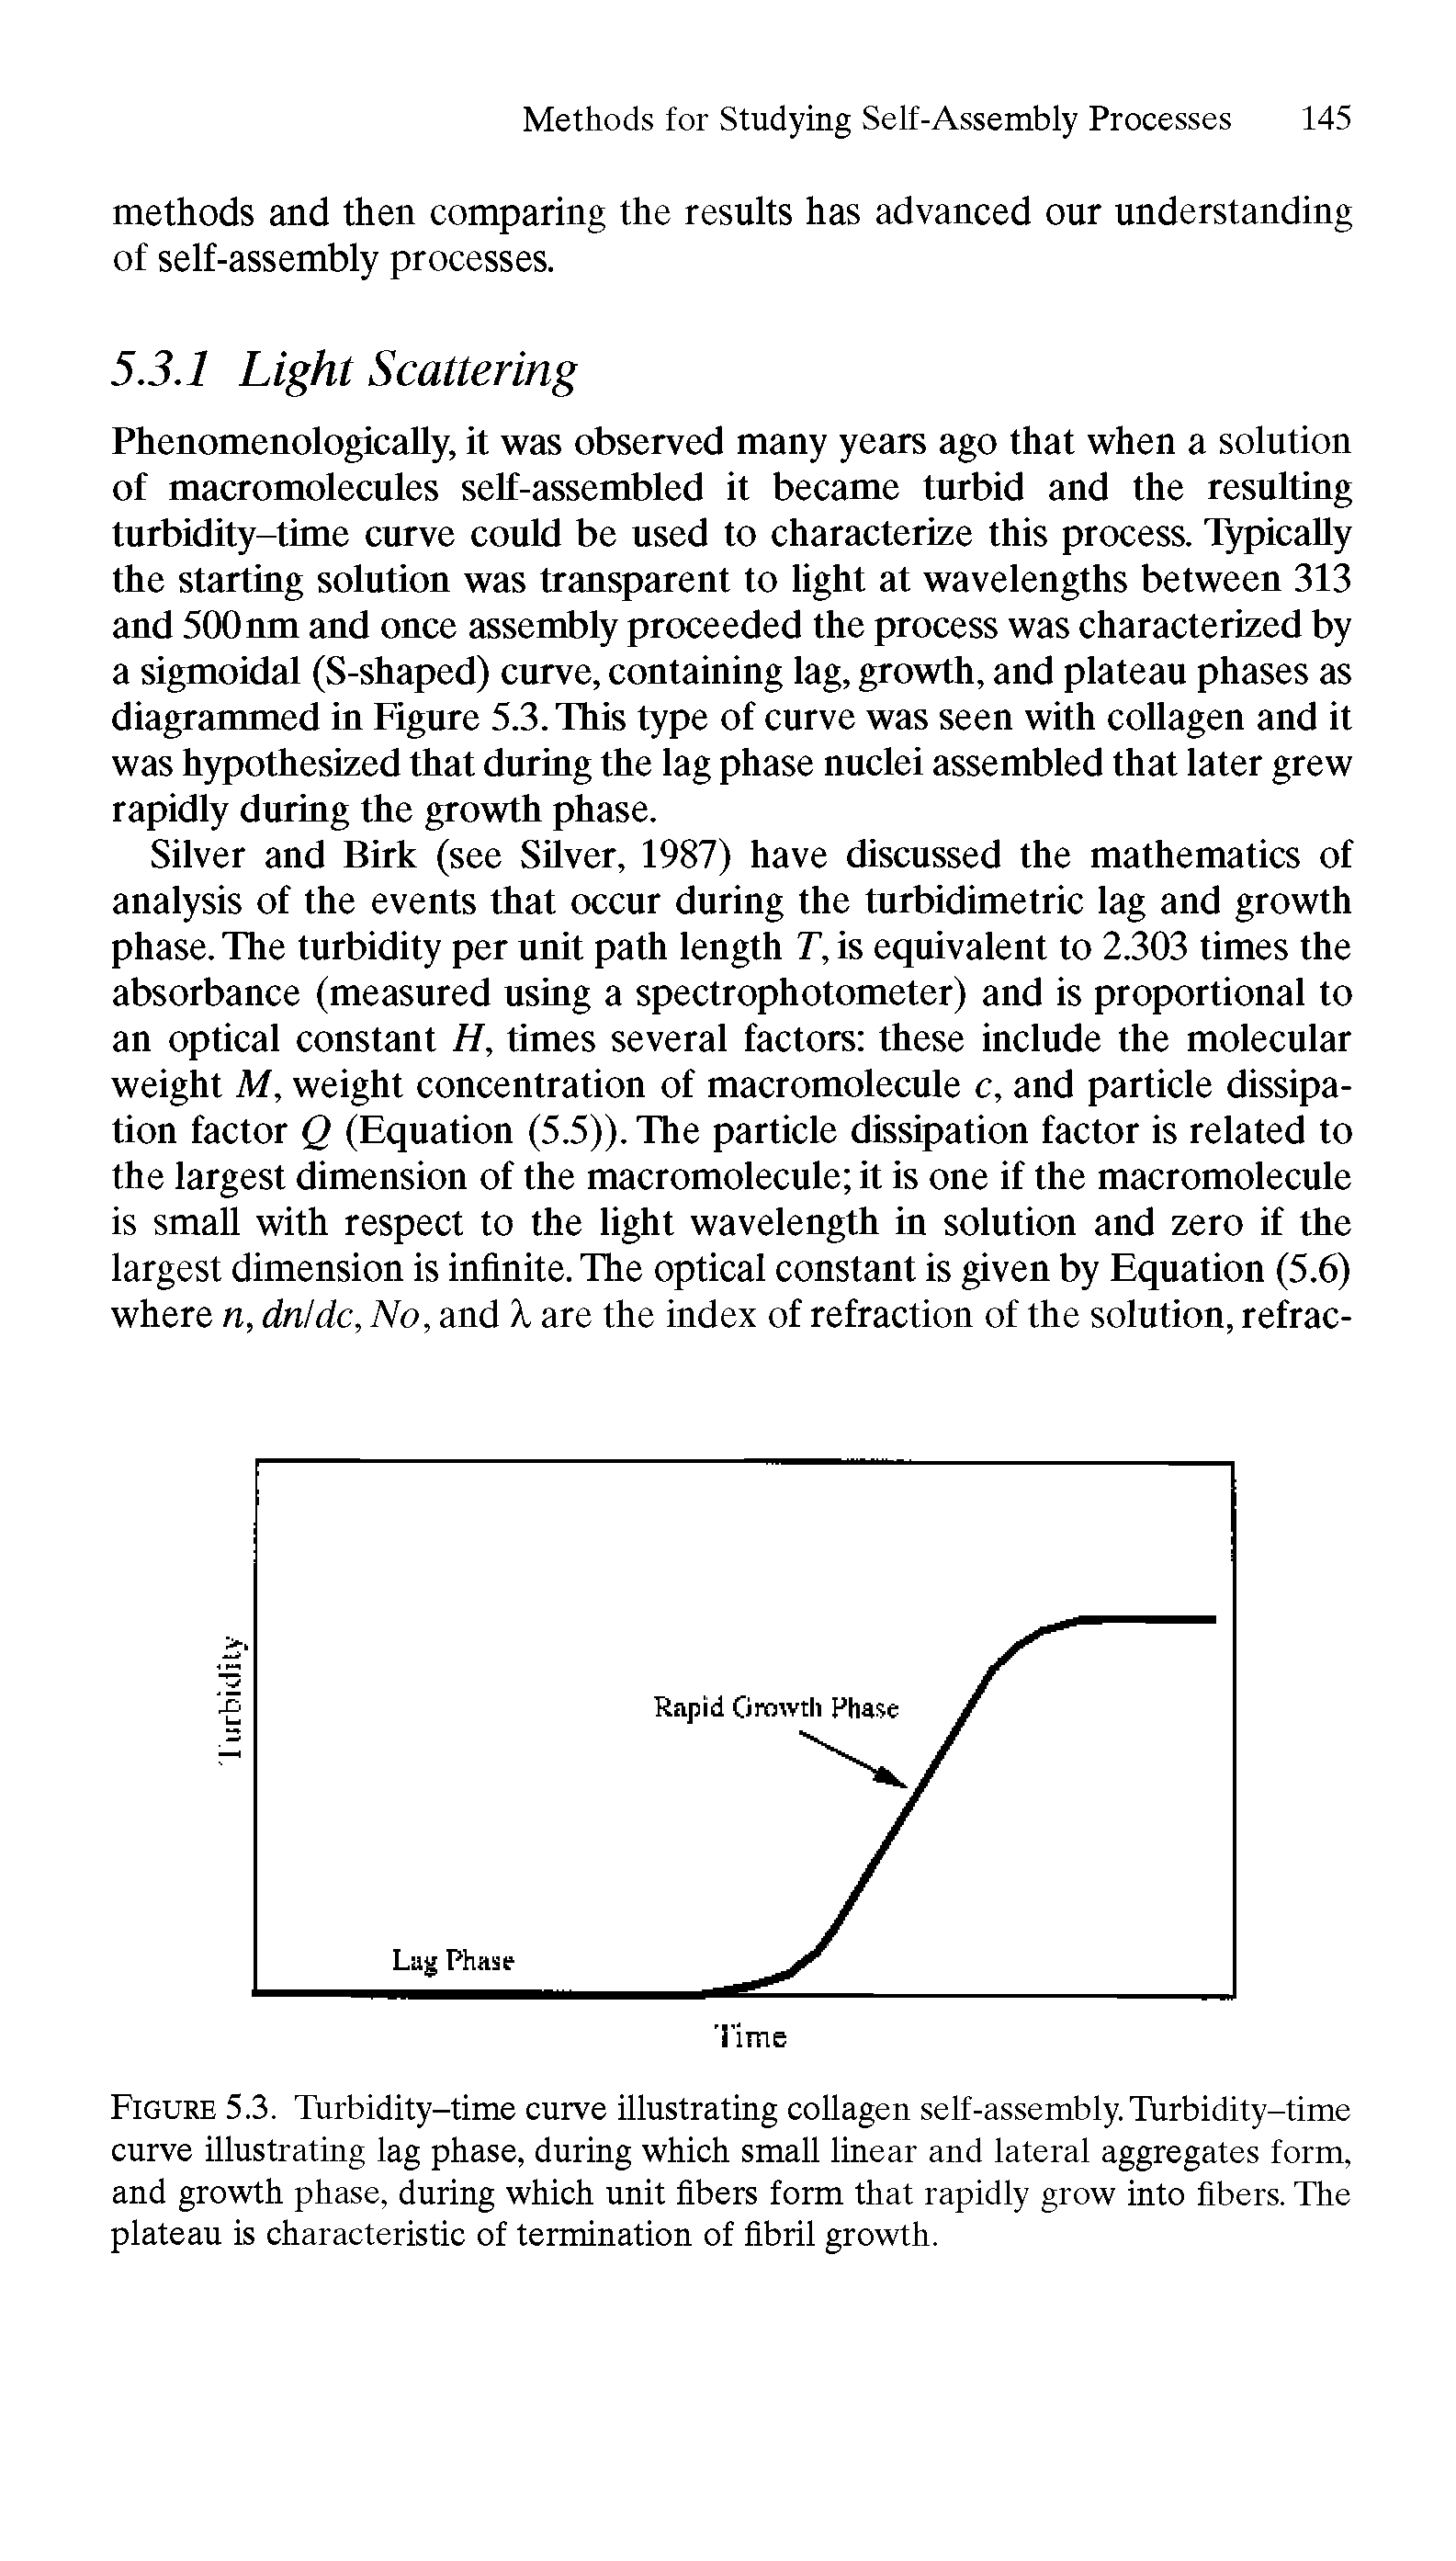 Figure 5.3. Turbidity-time curve illustrating collagen self-assembly.Turbidity-time curve illustrating lag phase, during which small linear and lateral aggregates form, and growth phase, during which unit fibers form that rapidly grow into fibers. The plateau is characteristic of termination of fibril growth.